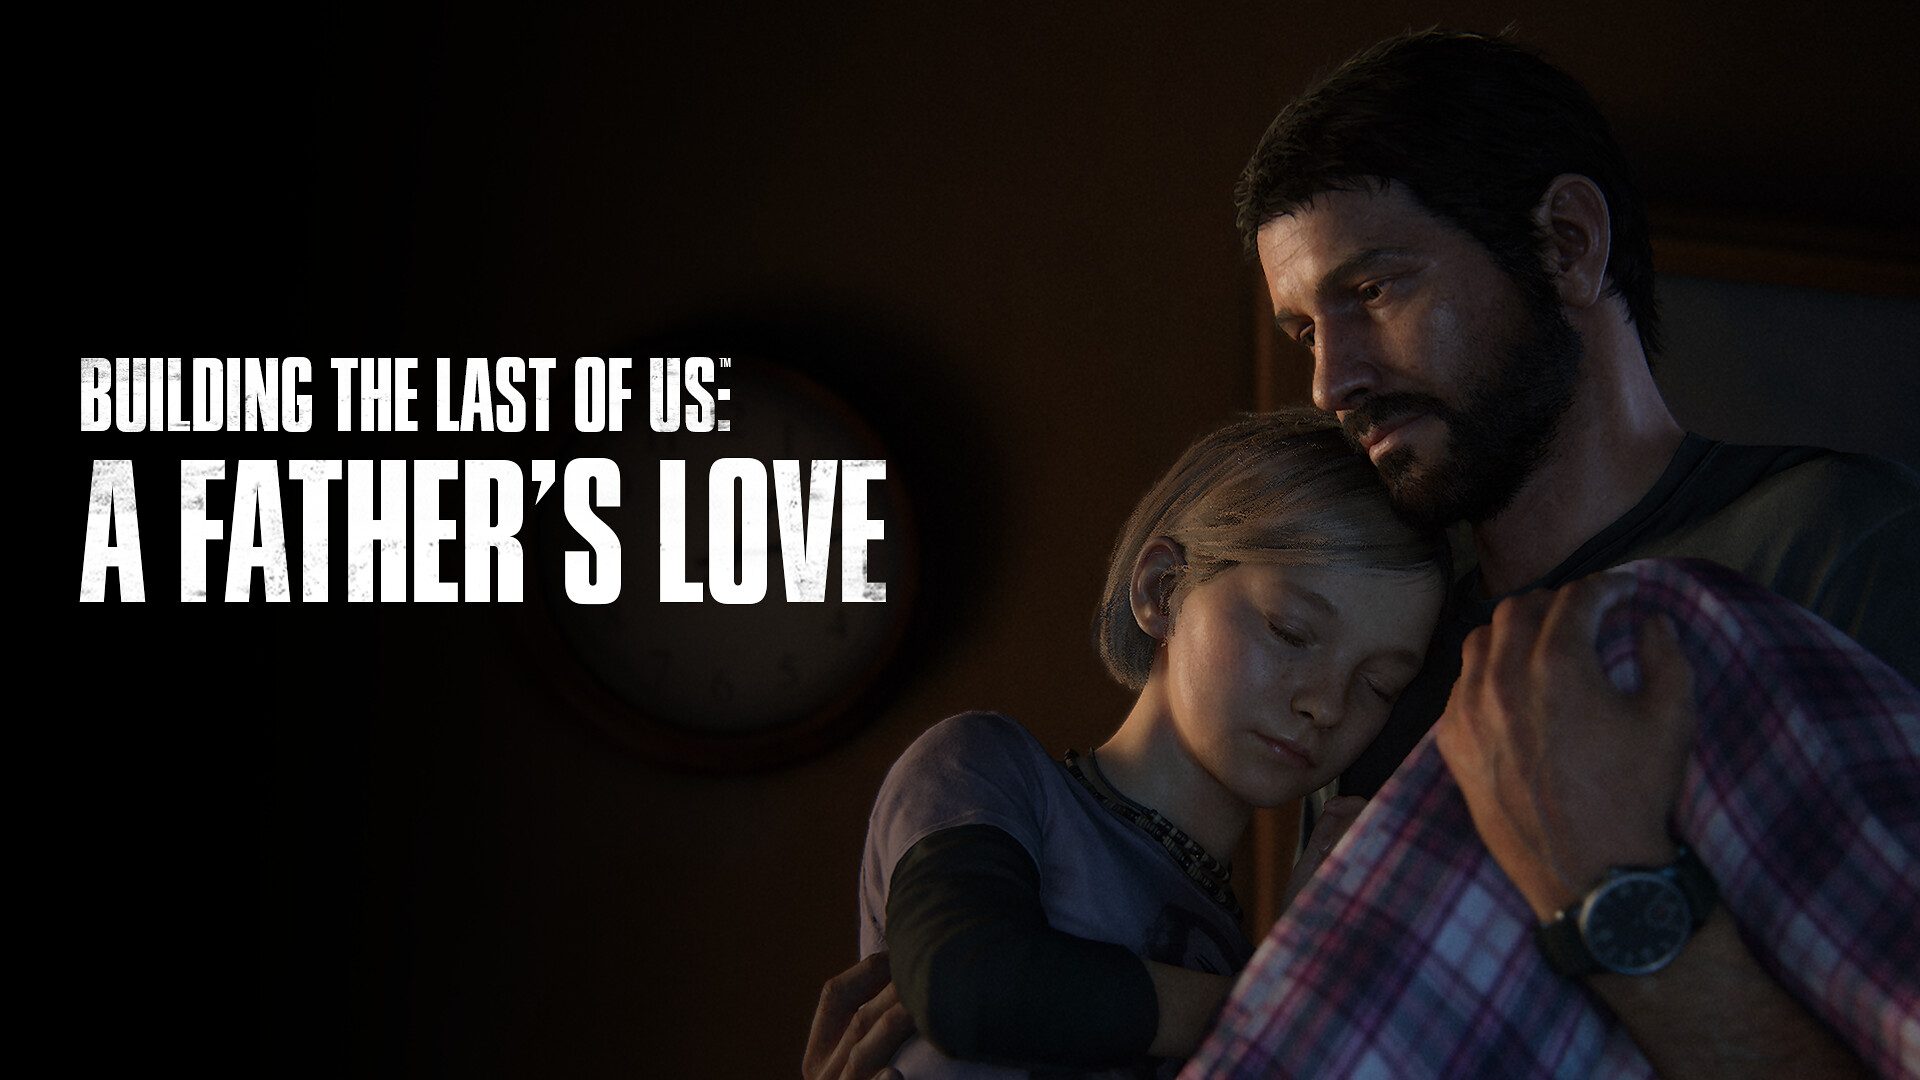 The Last of Us Episode 6 Filming Mistake Continues HBO Tradition